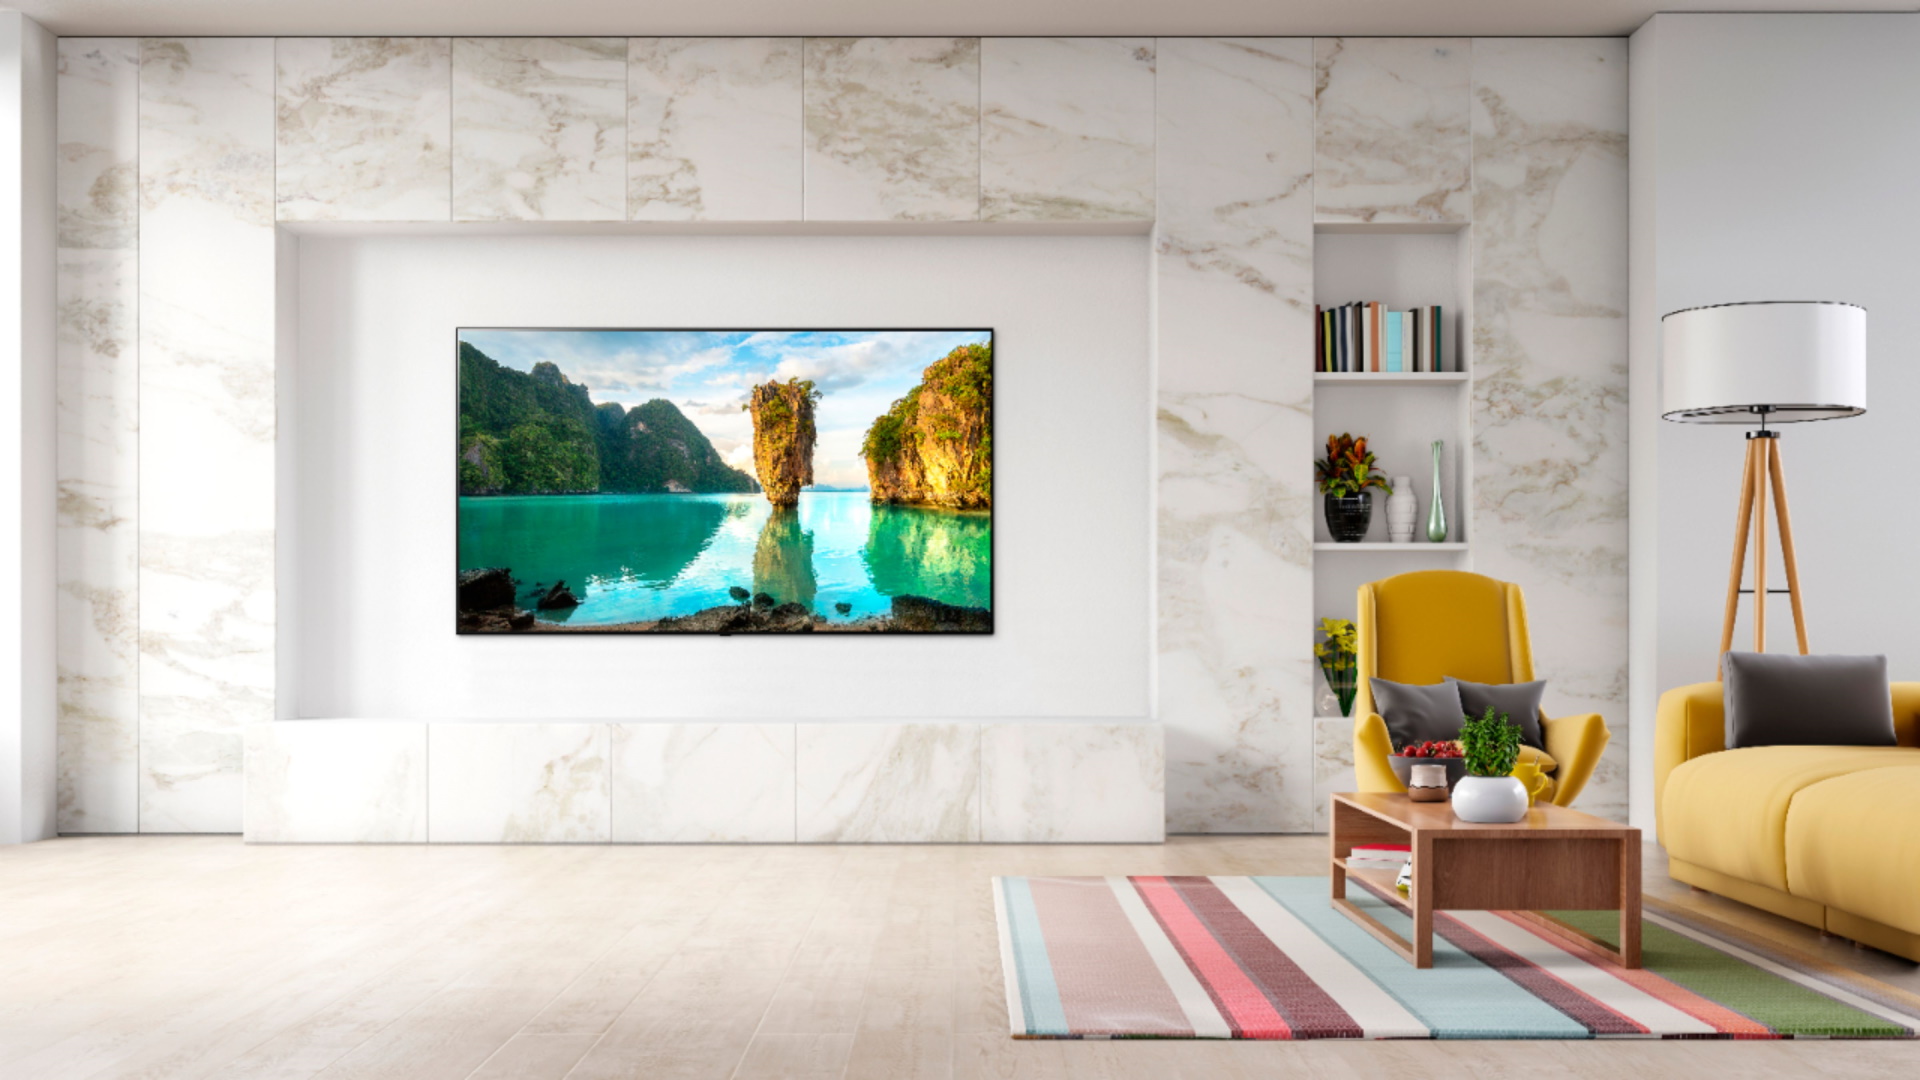 Best TV 2021 Upgrade your lounge with the best OLED, 4K and Smart TVs